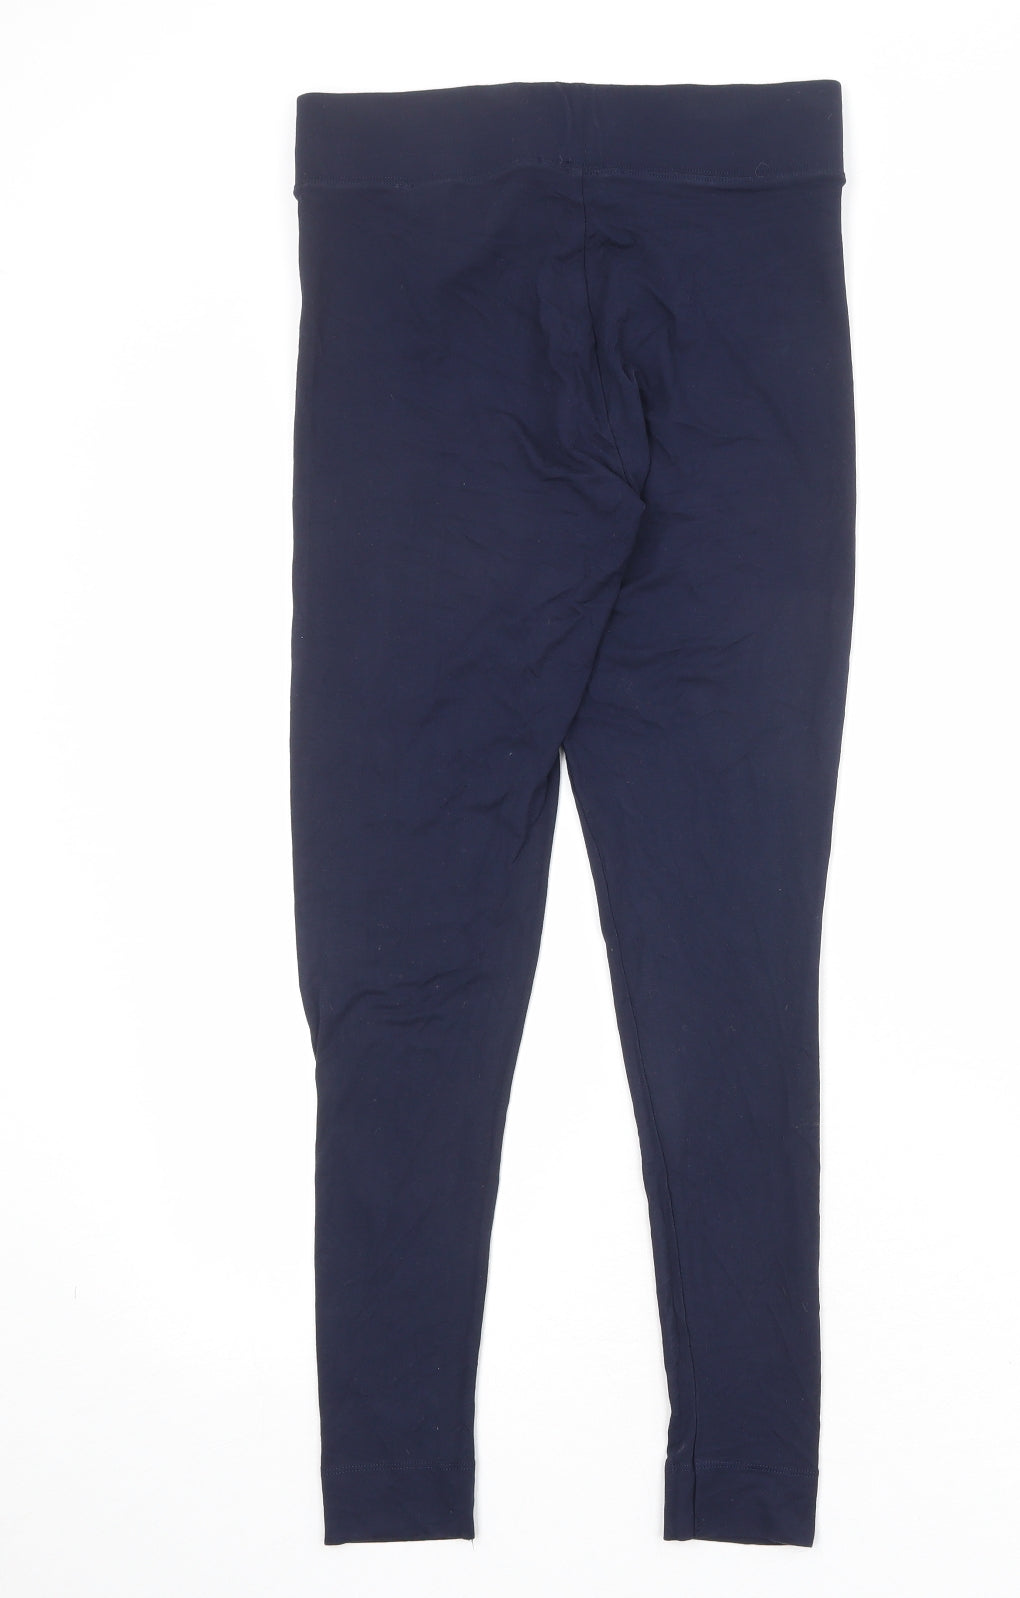 Marks and Spencer Womens Blue Viscose Carrot Leggings Size 10